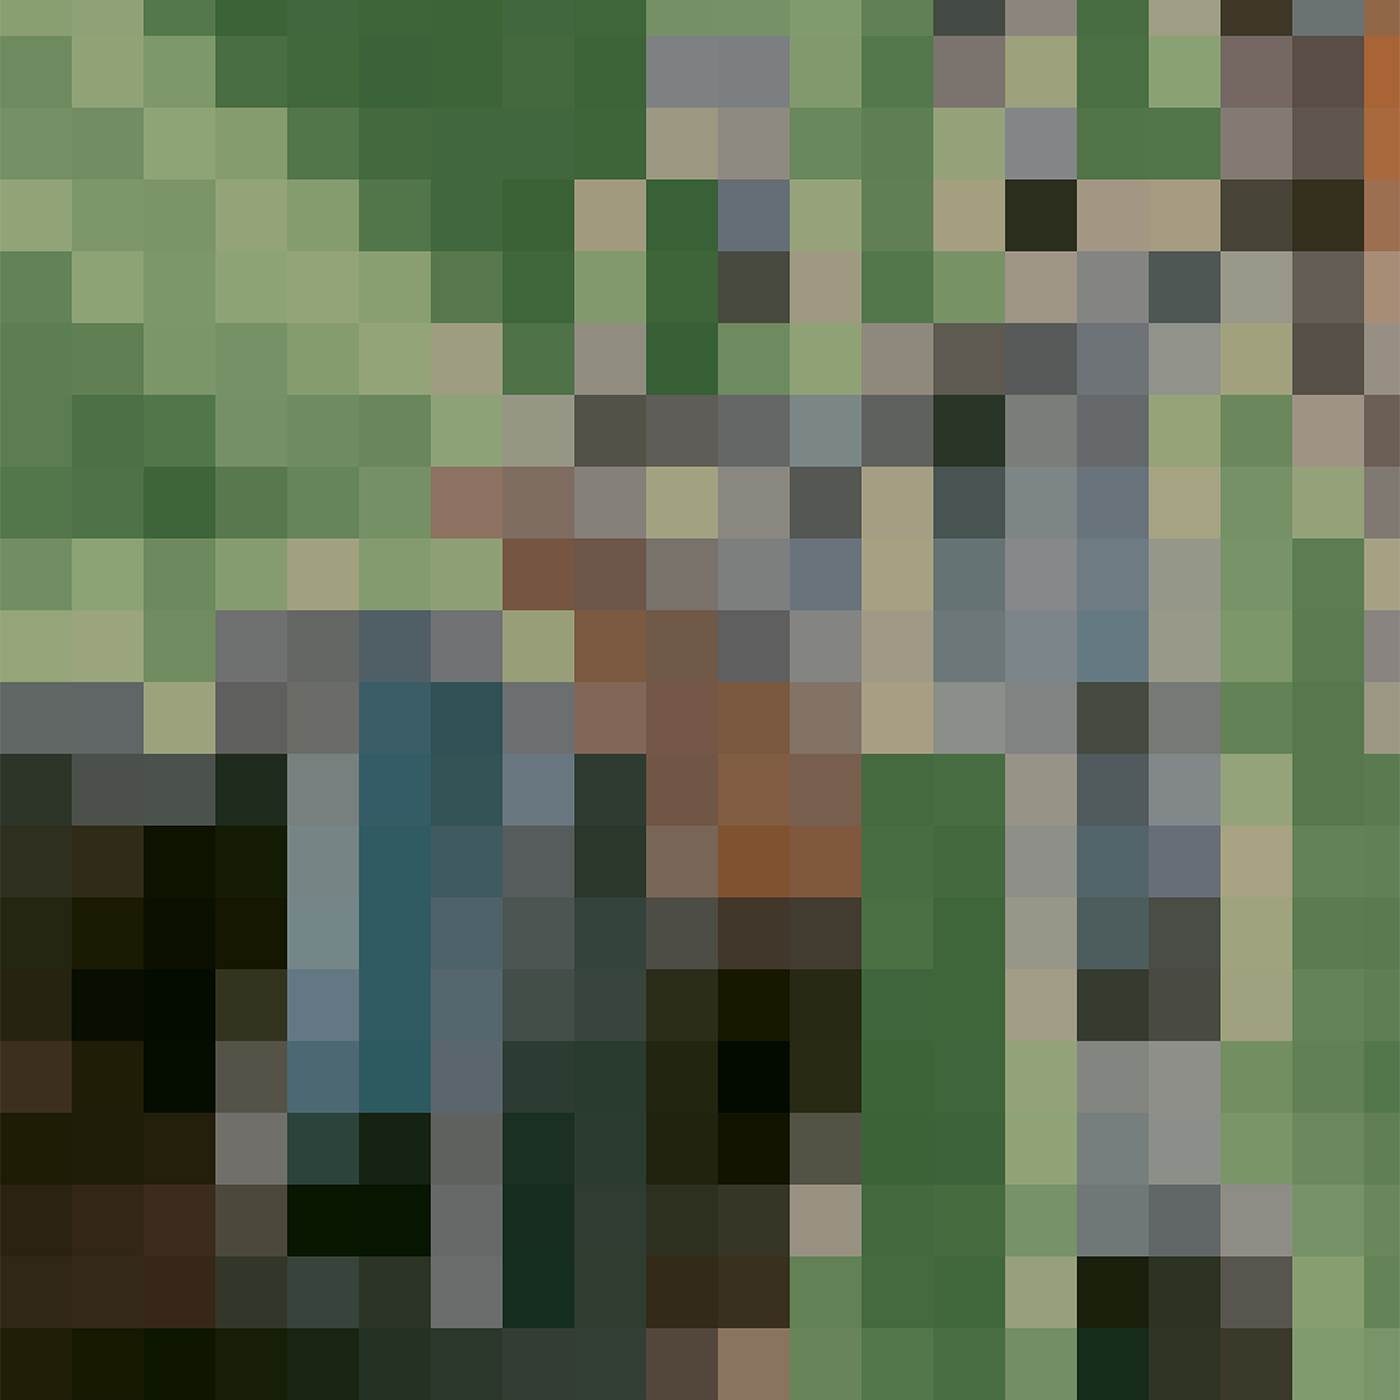 Highly pixelated image with green, brown, blue, gray, and black.